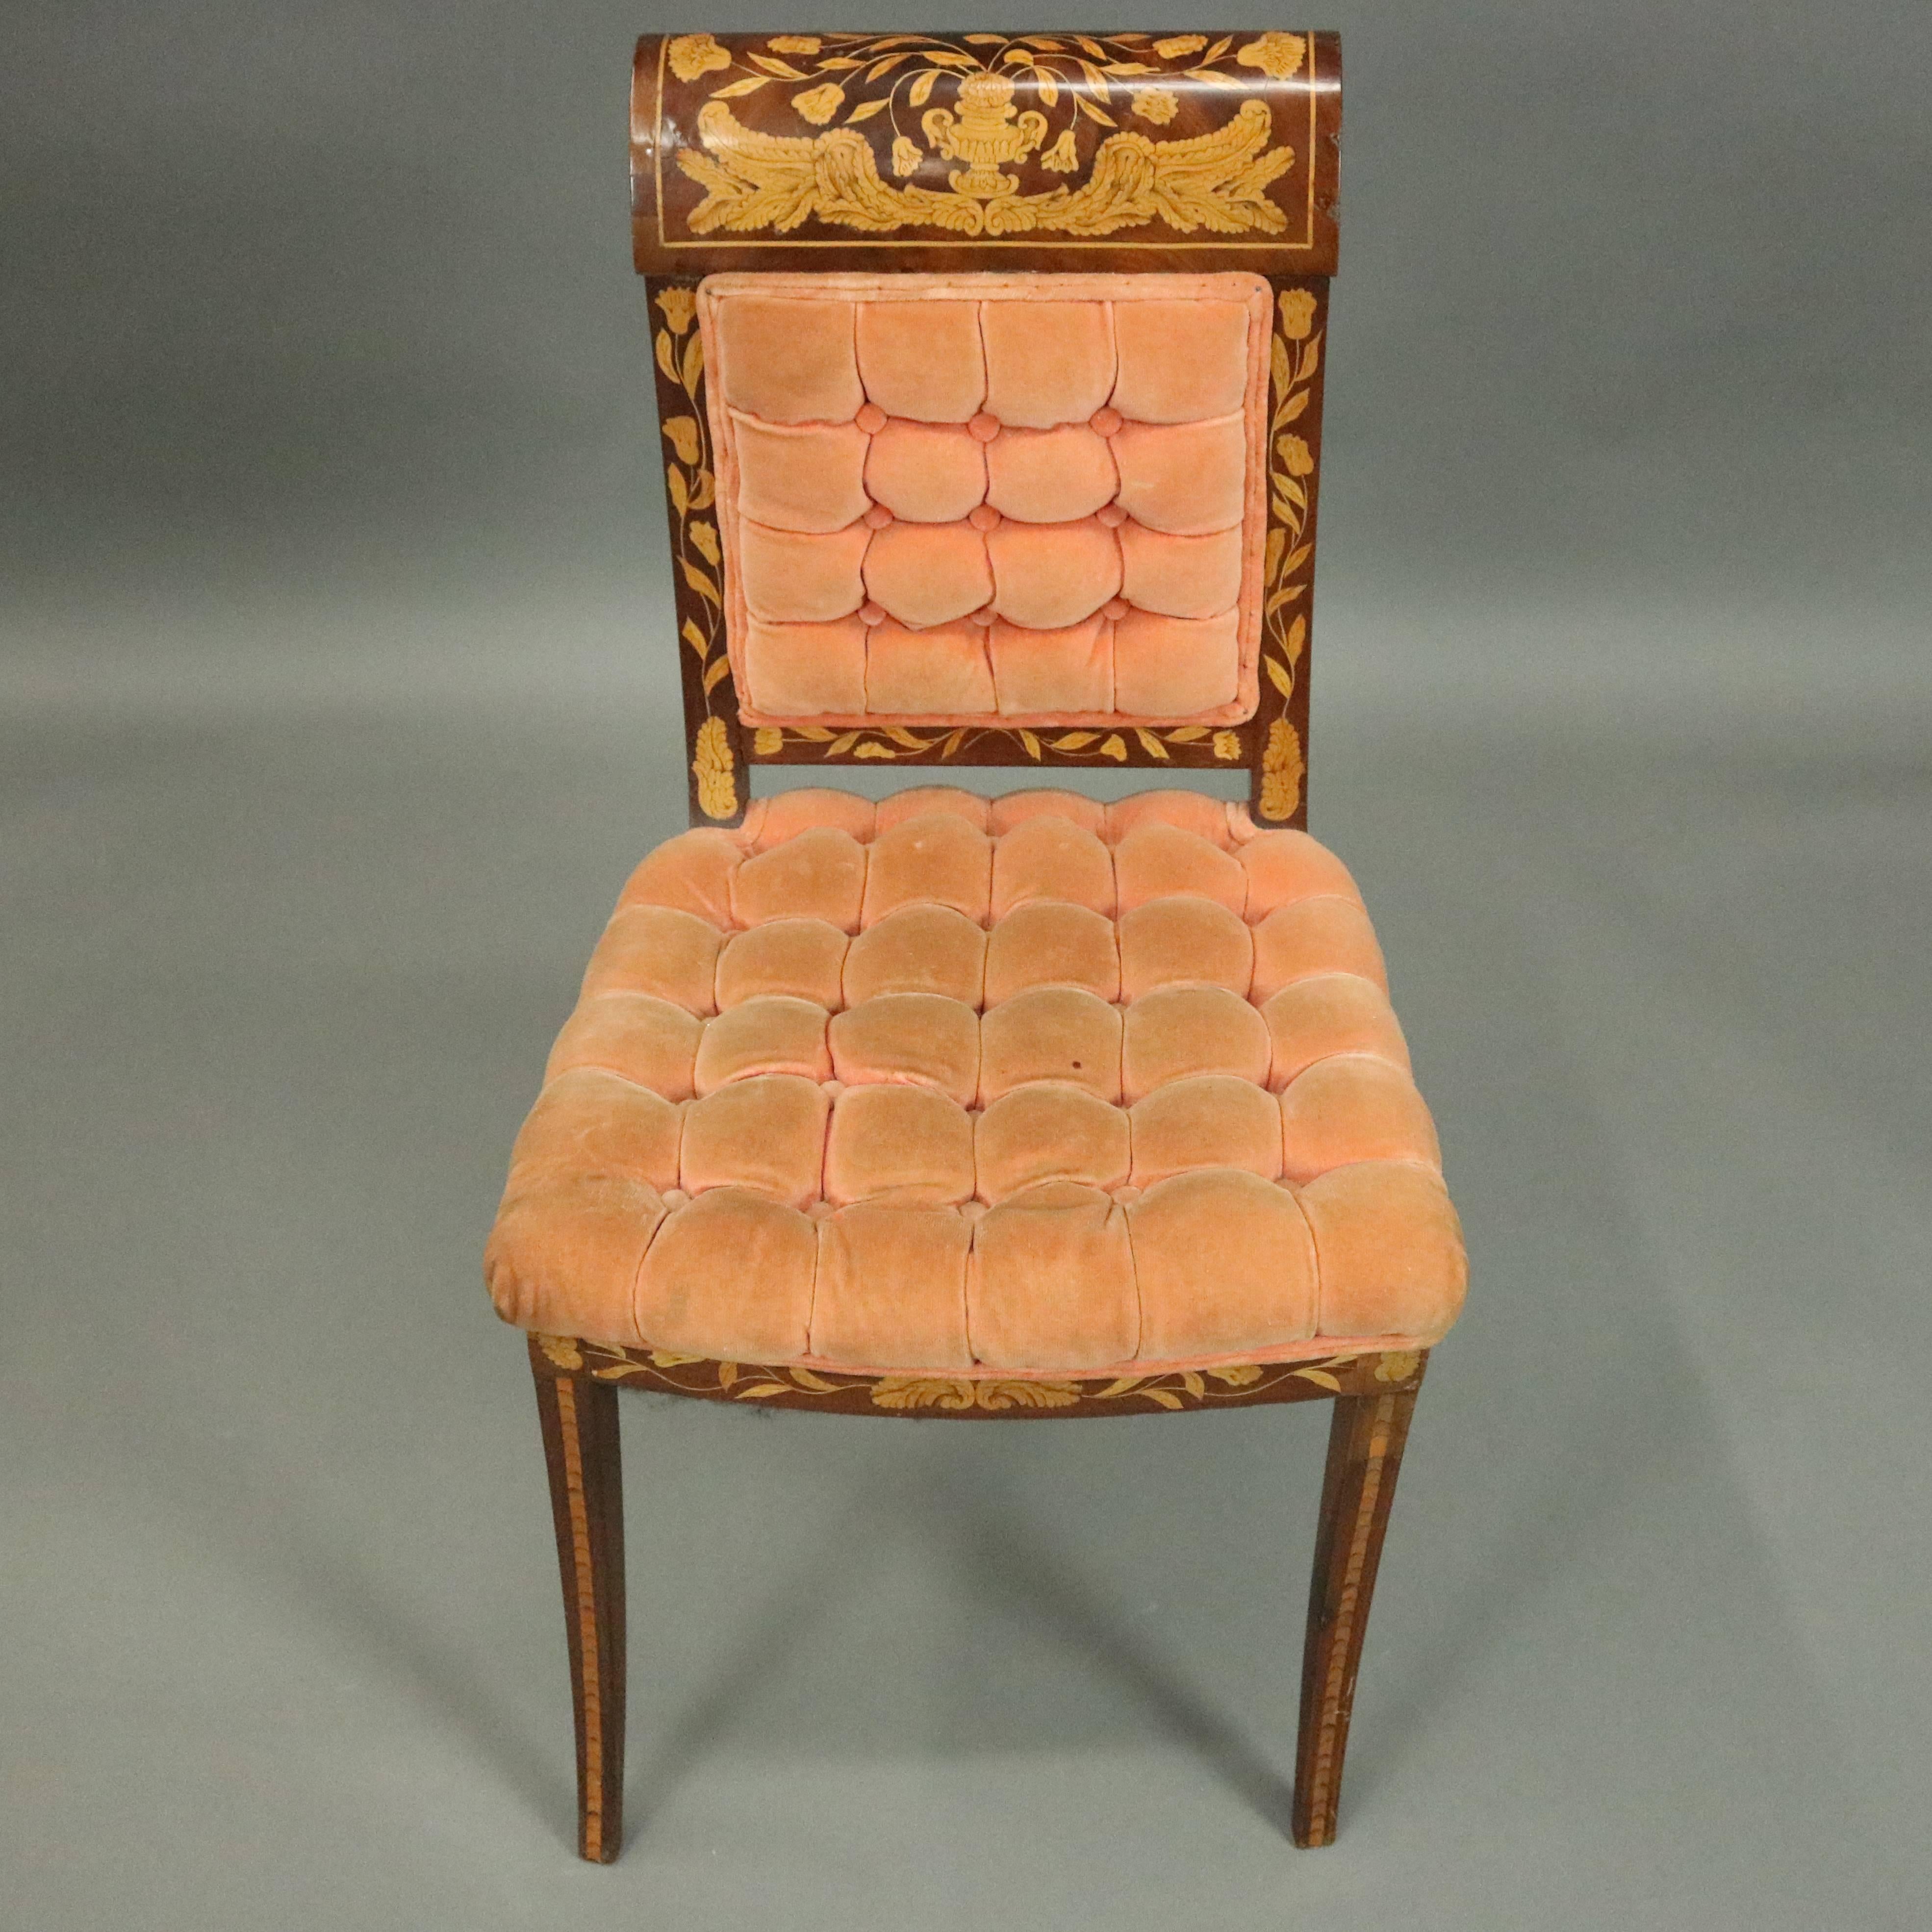 Satinwood Dutch Marquetry Upholstered Mahogany Side Chair with Foliate Inlay, circa 1890